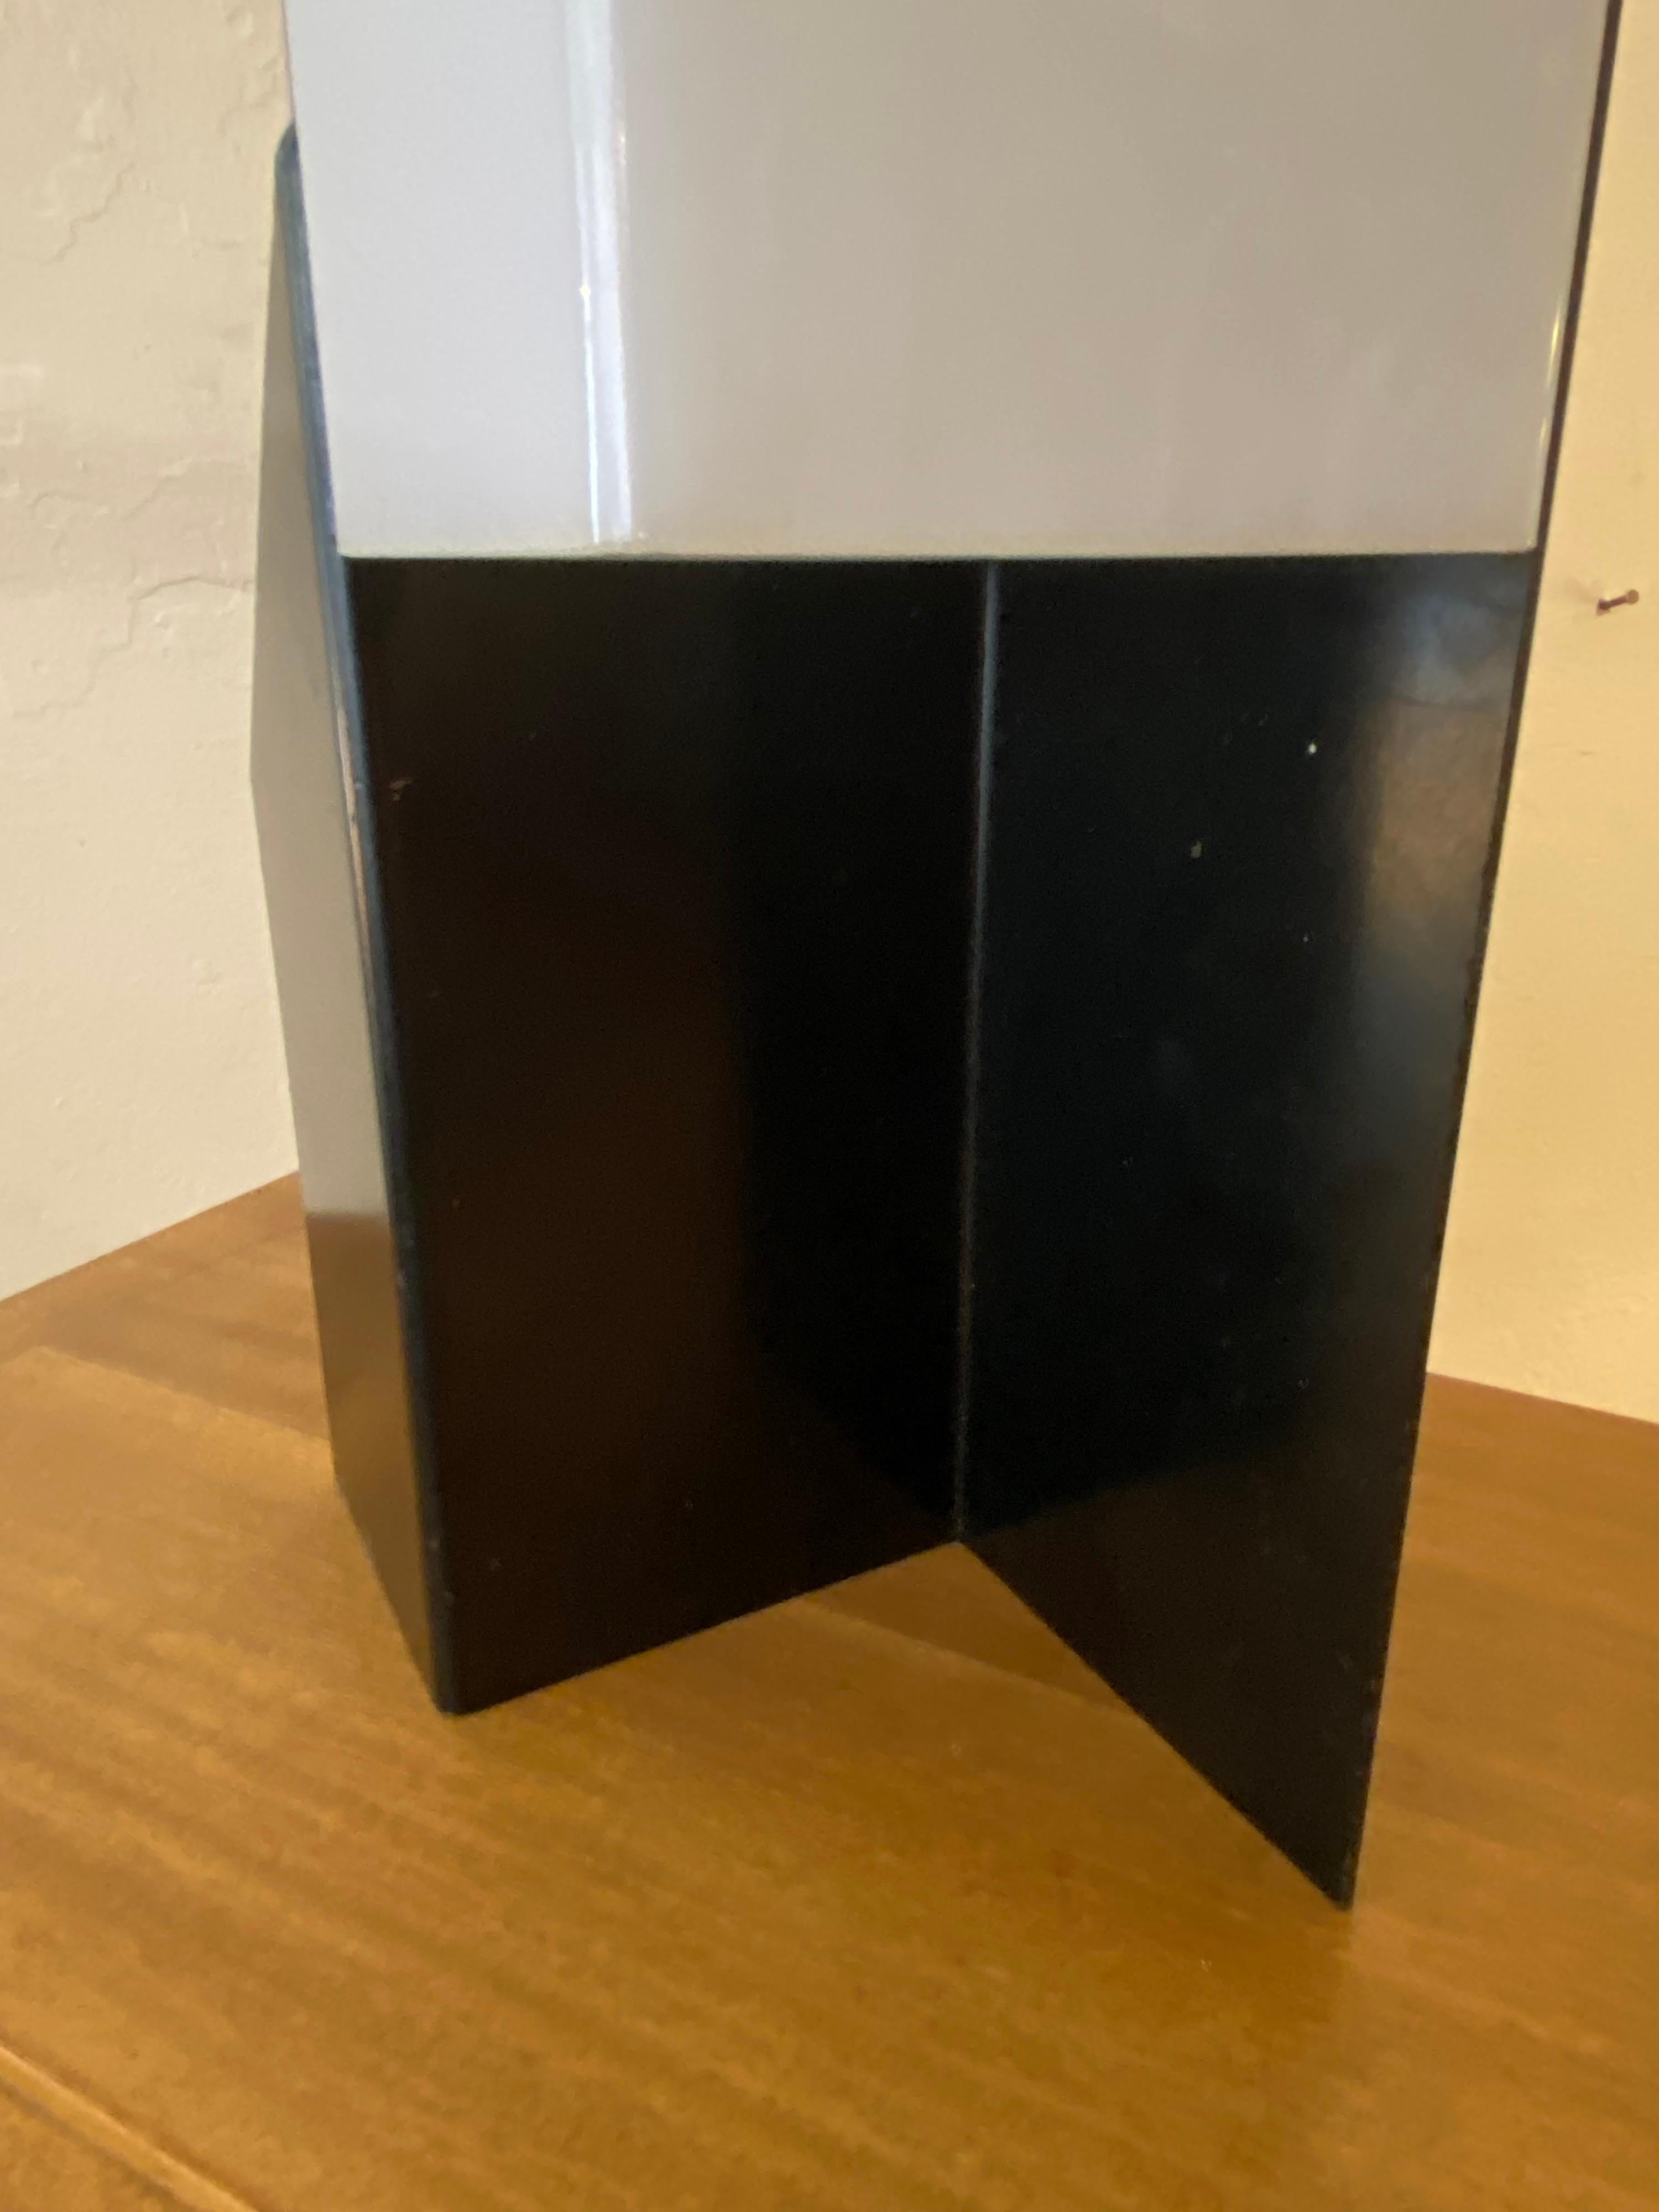 Architectural metal table lamp with plastic shade. Nice simple look and design, probably dates to the late 1970's or early 80's. Body is painted black with a white shade, two sockets give light up and down.